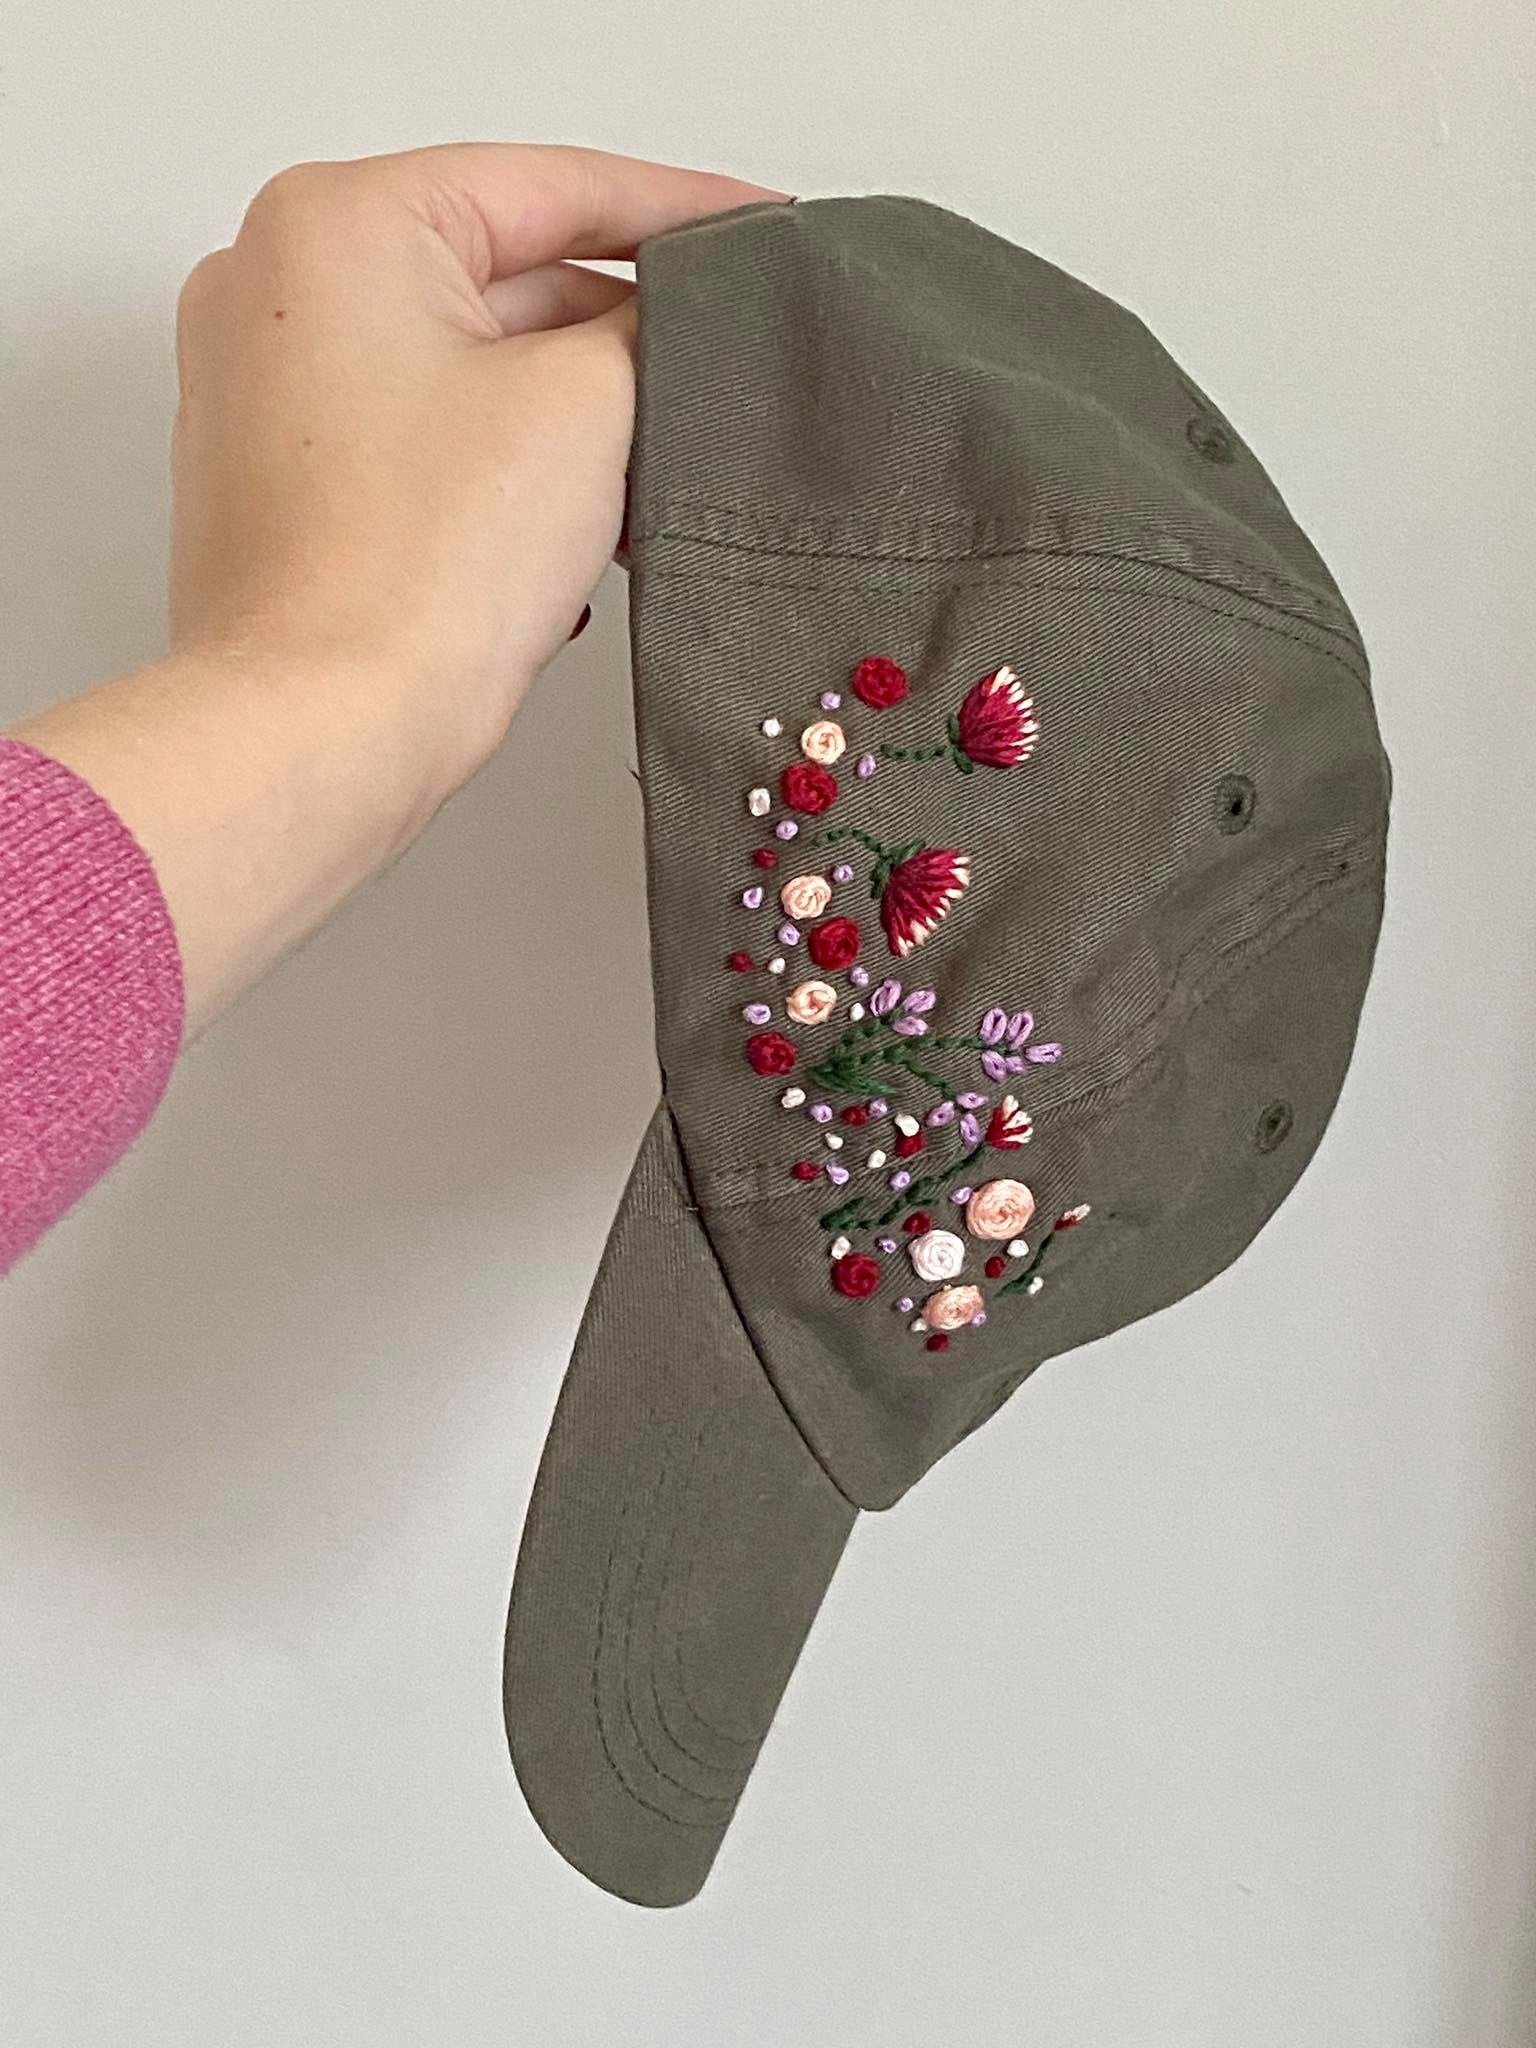 How to Embroider on a Hat or Cap | Simple DIY